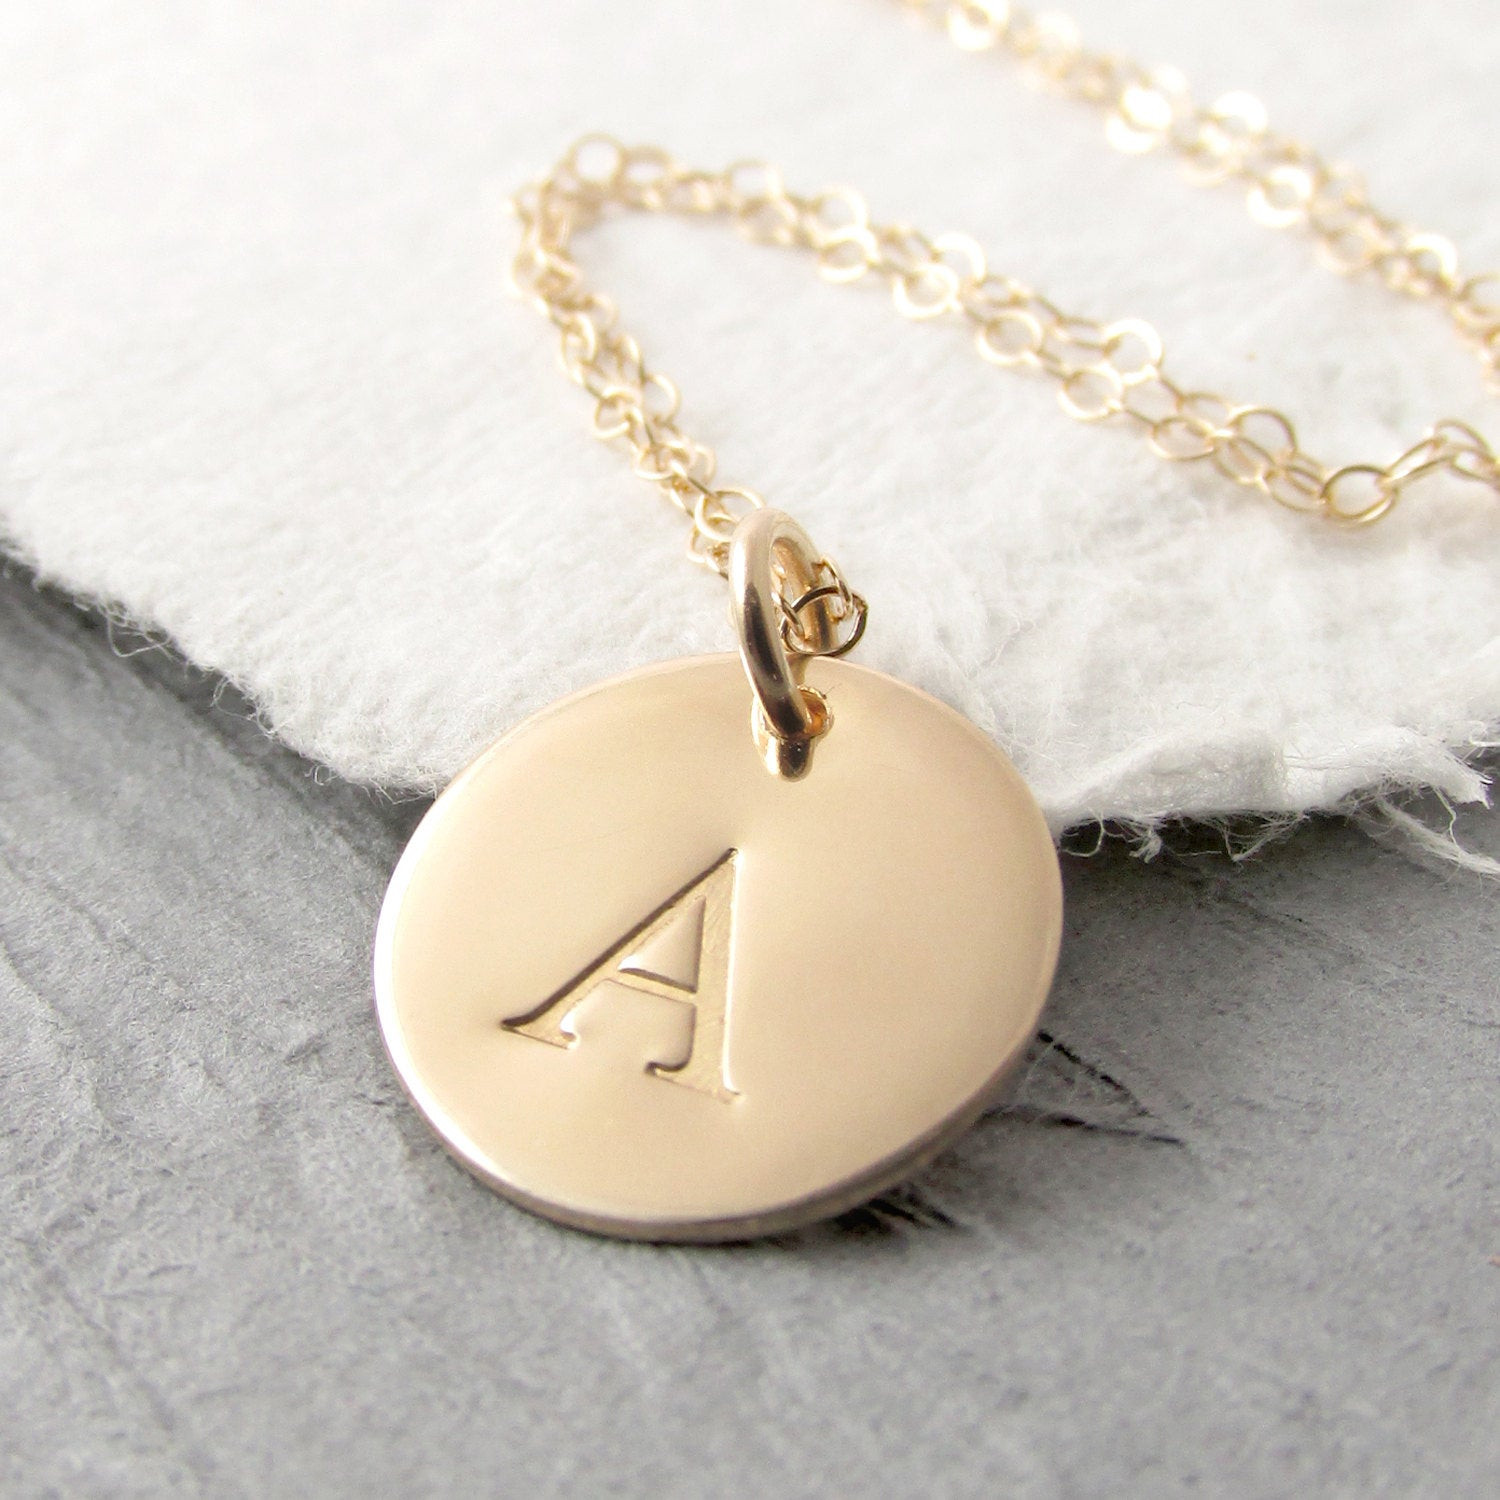 14k Gold Initial Necklace
 Initial Necklace Gold 14k Gold Pendant Necklace Solid Gold